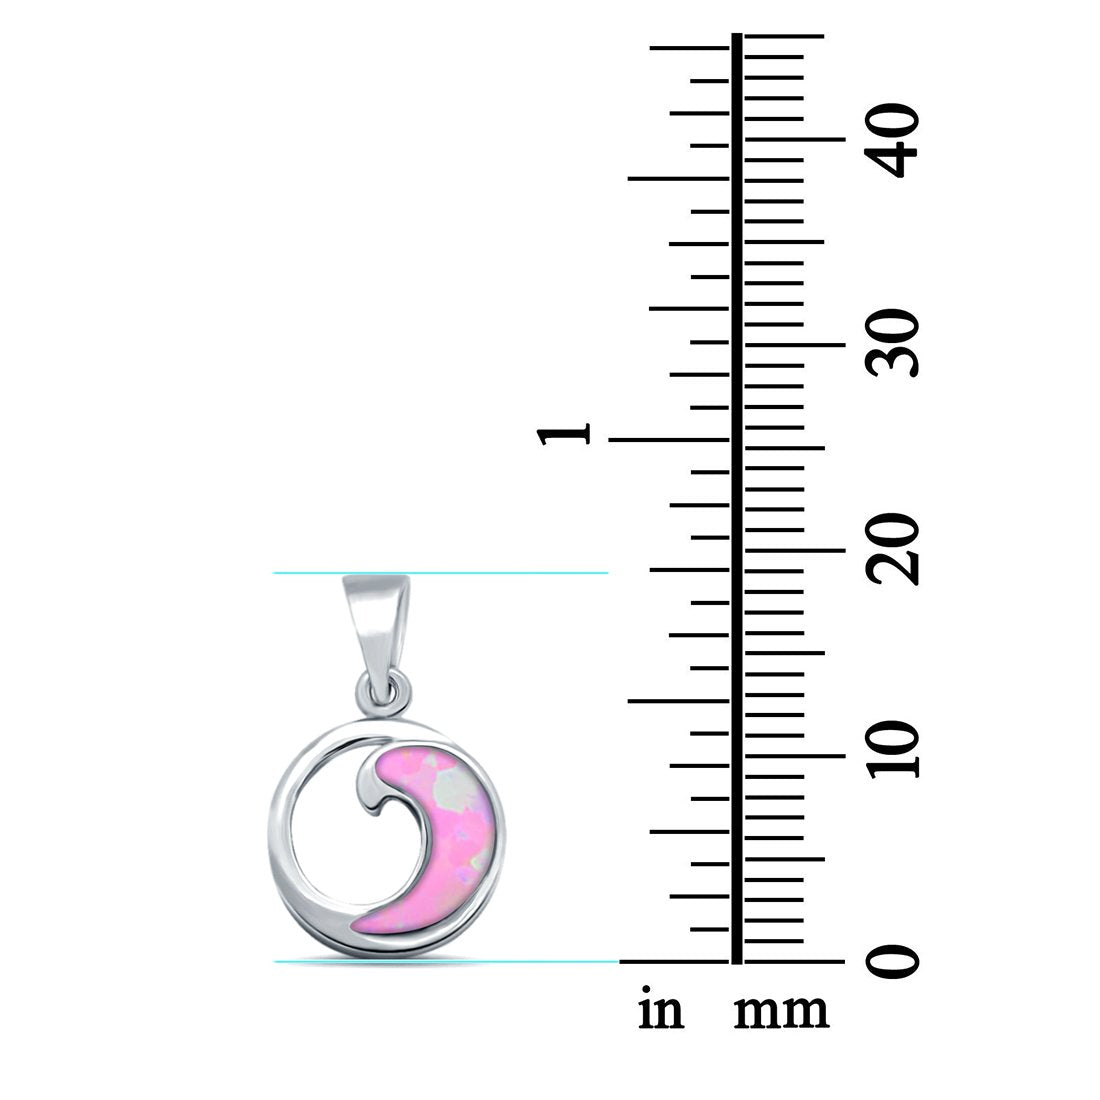 Lab Created Pink Opal Wave Design 925 Sterling Silver Charm Pendant